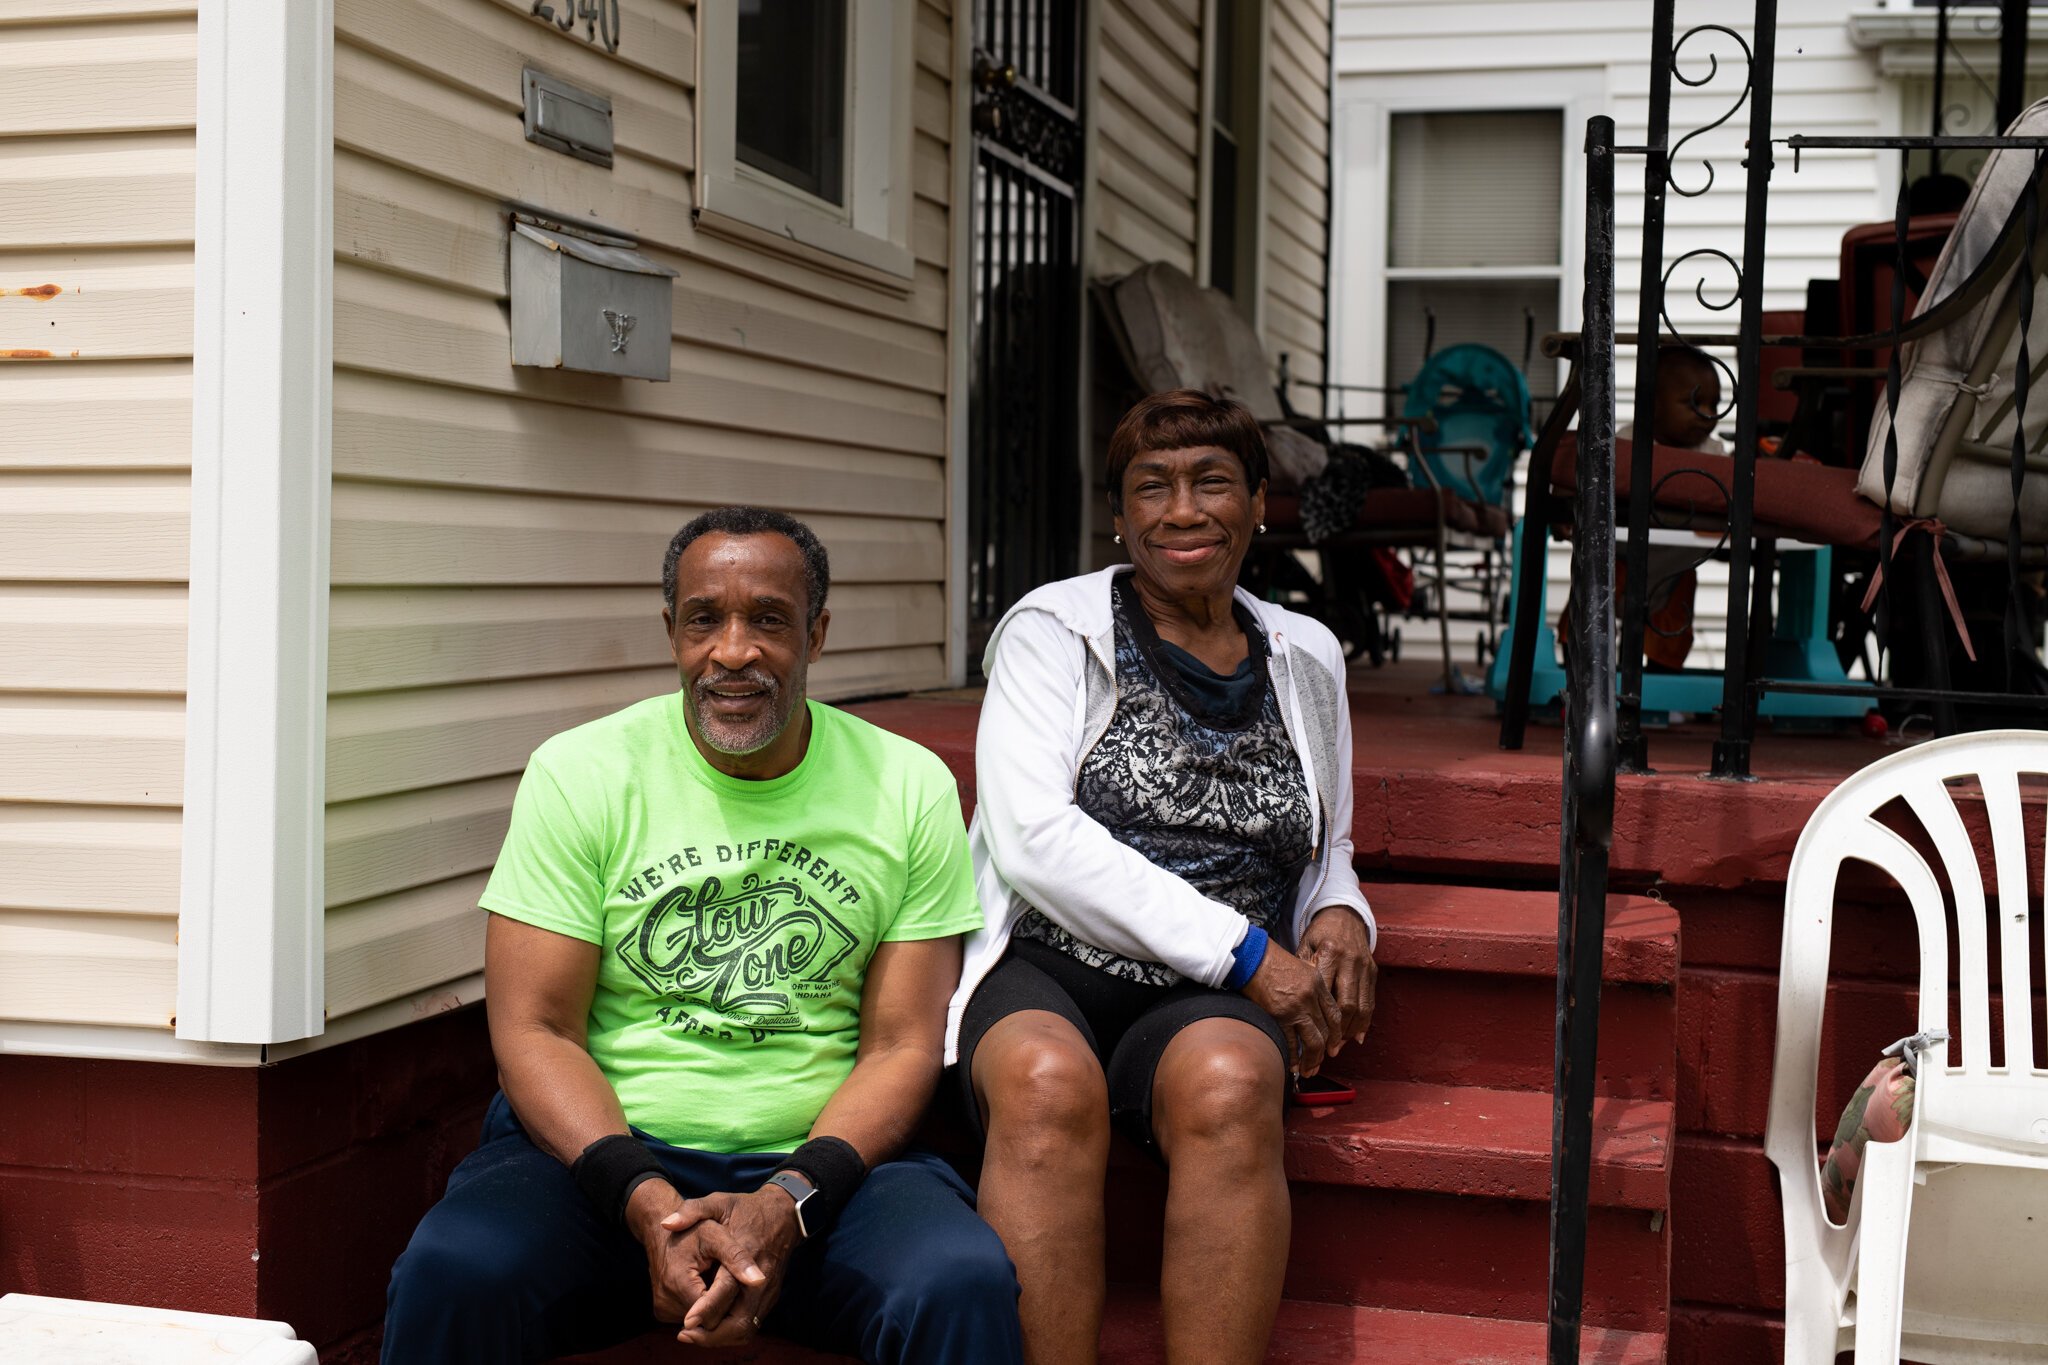 Powell Park's namesakes and neighborhood caretakers are Renaissance Pointe residents Lester and Hester Powell.